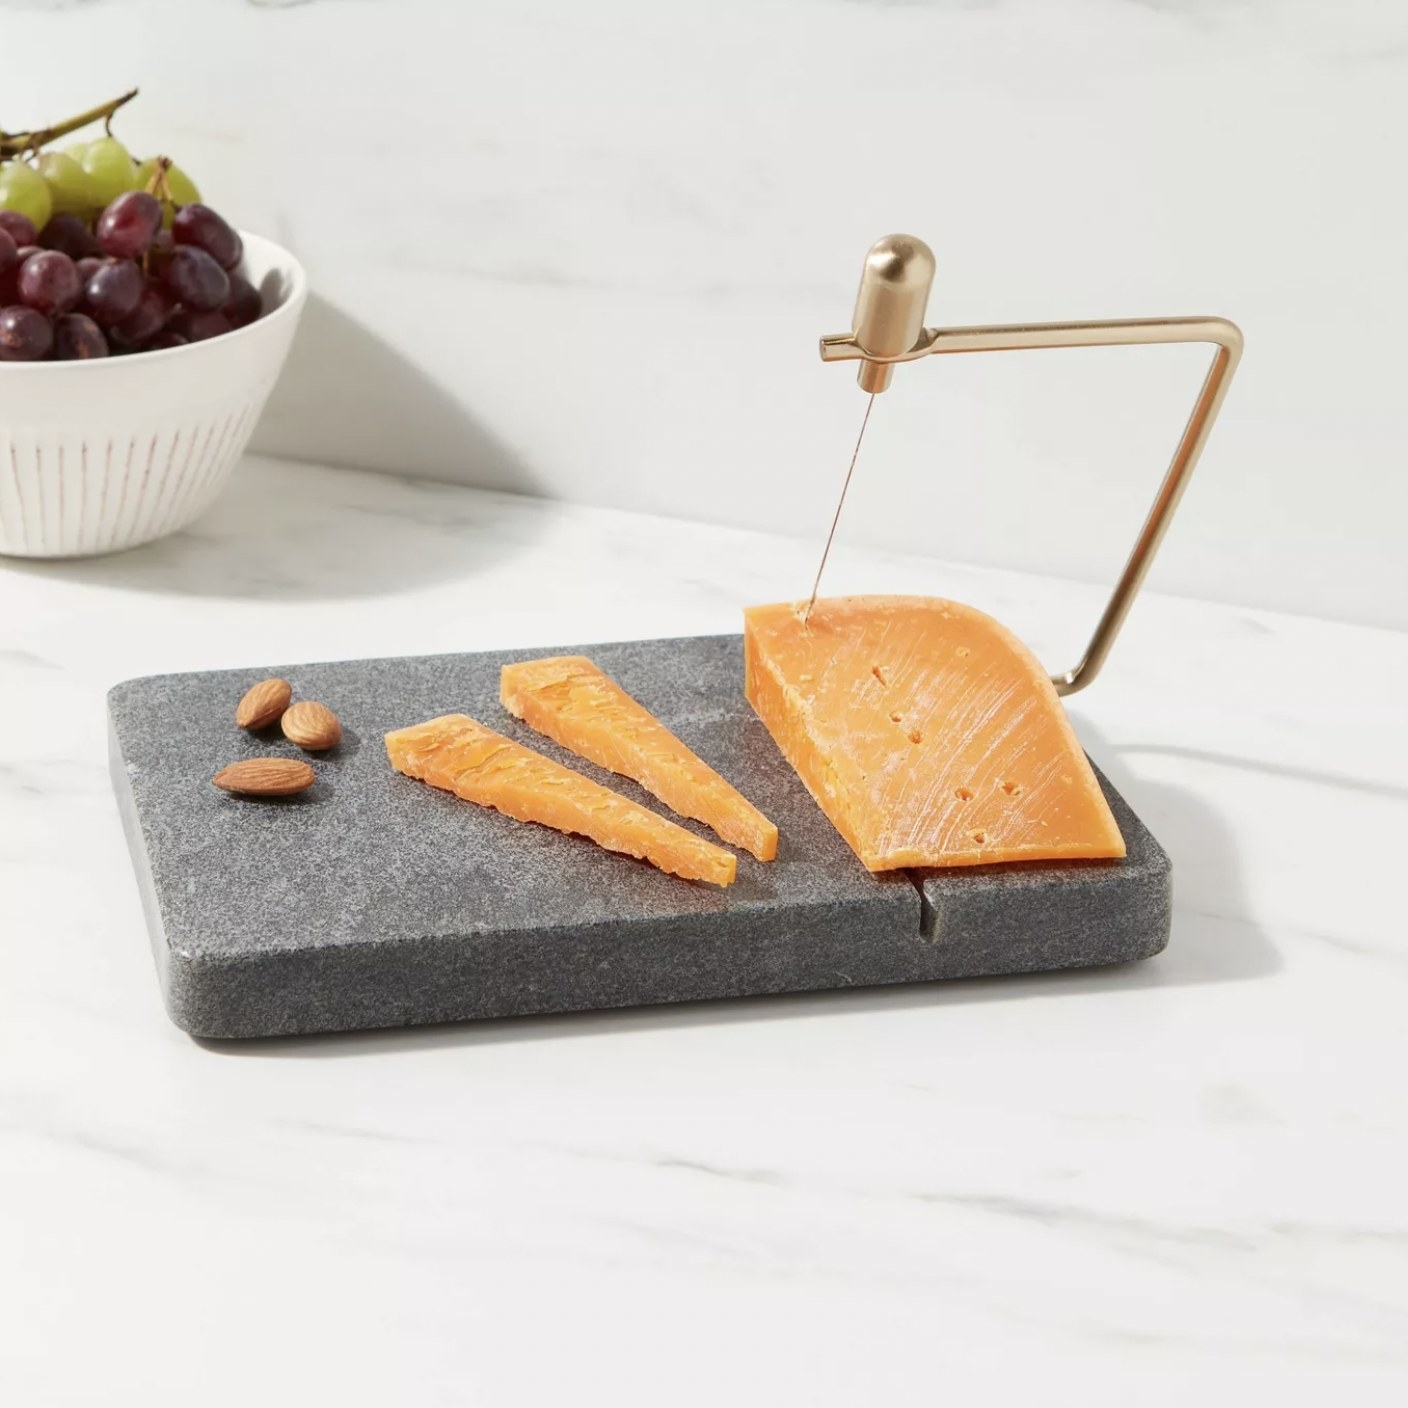 The grey marble cheese platter being used to slice a block of cheese